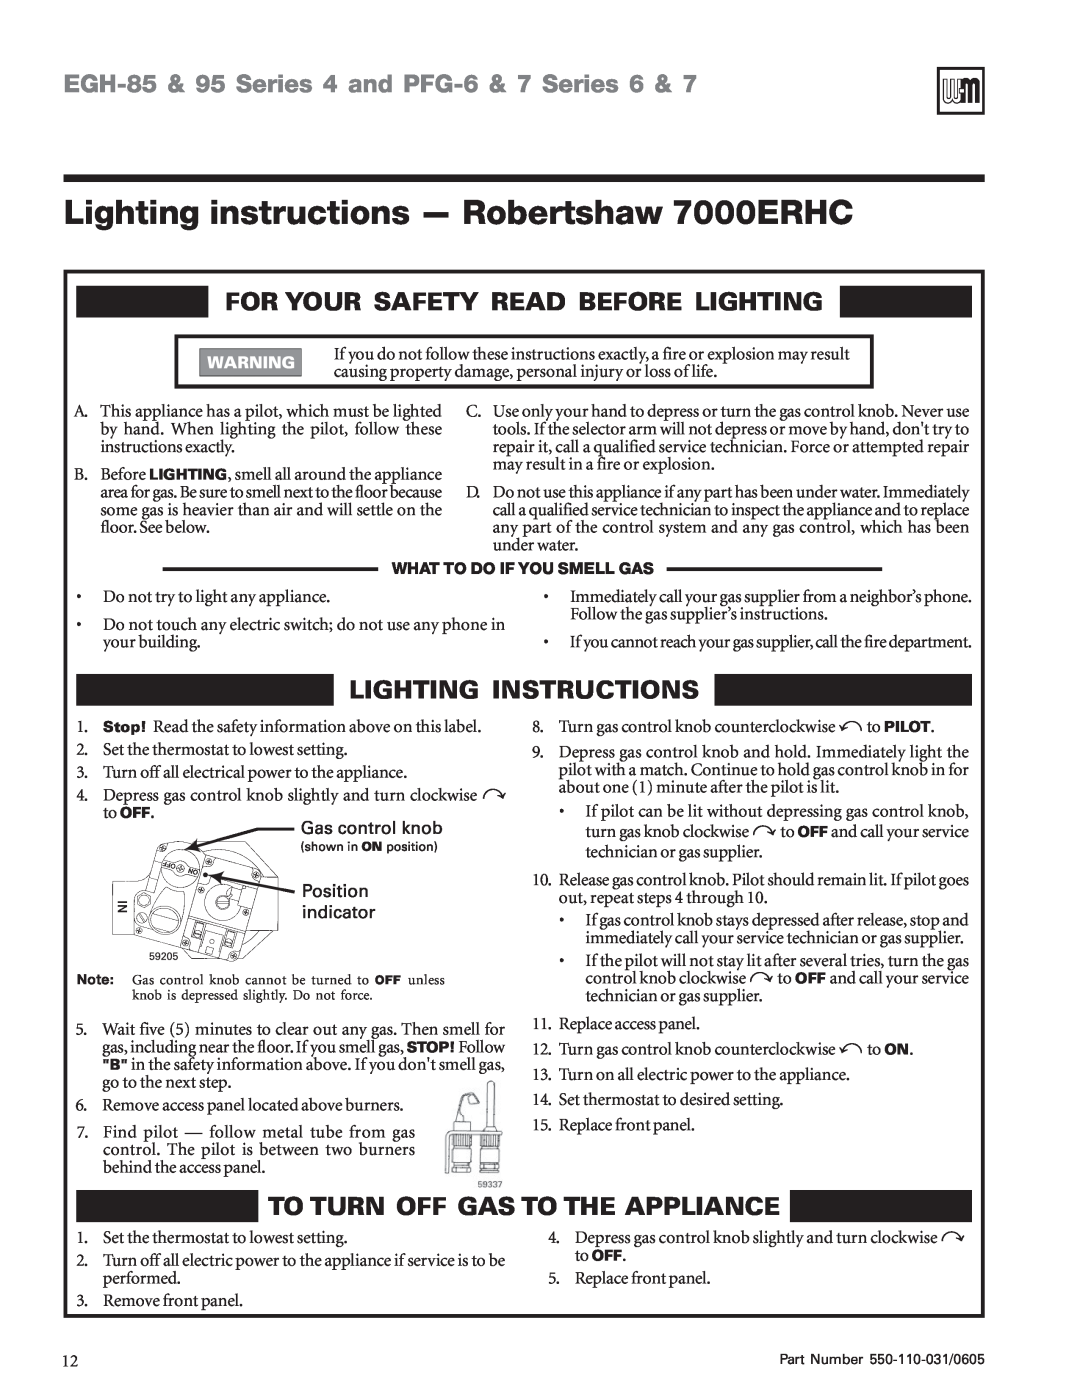 Weil-McLain PFG-6 Lighting instructions - Robertshaw 7000ERHC, For Your Safety Read Before Lighting, Lighting Instructions 